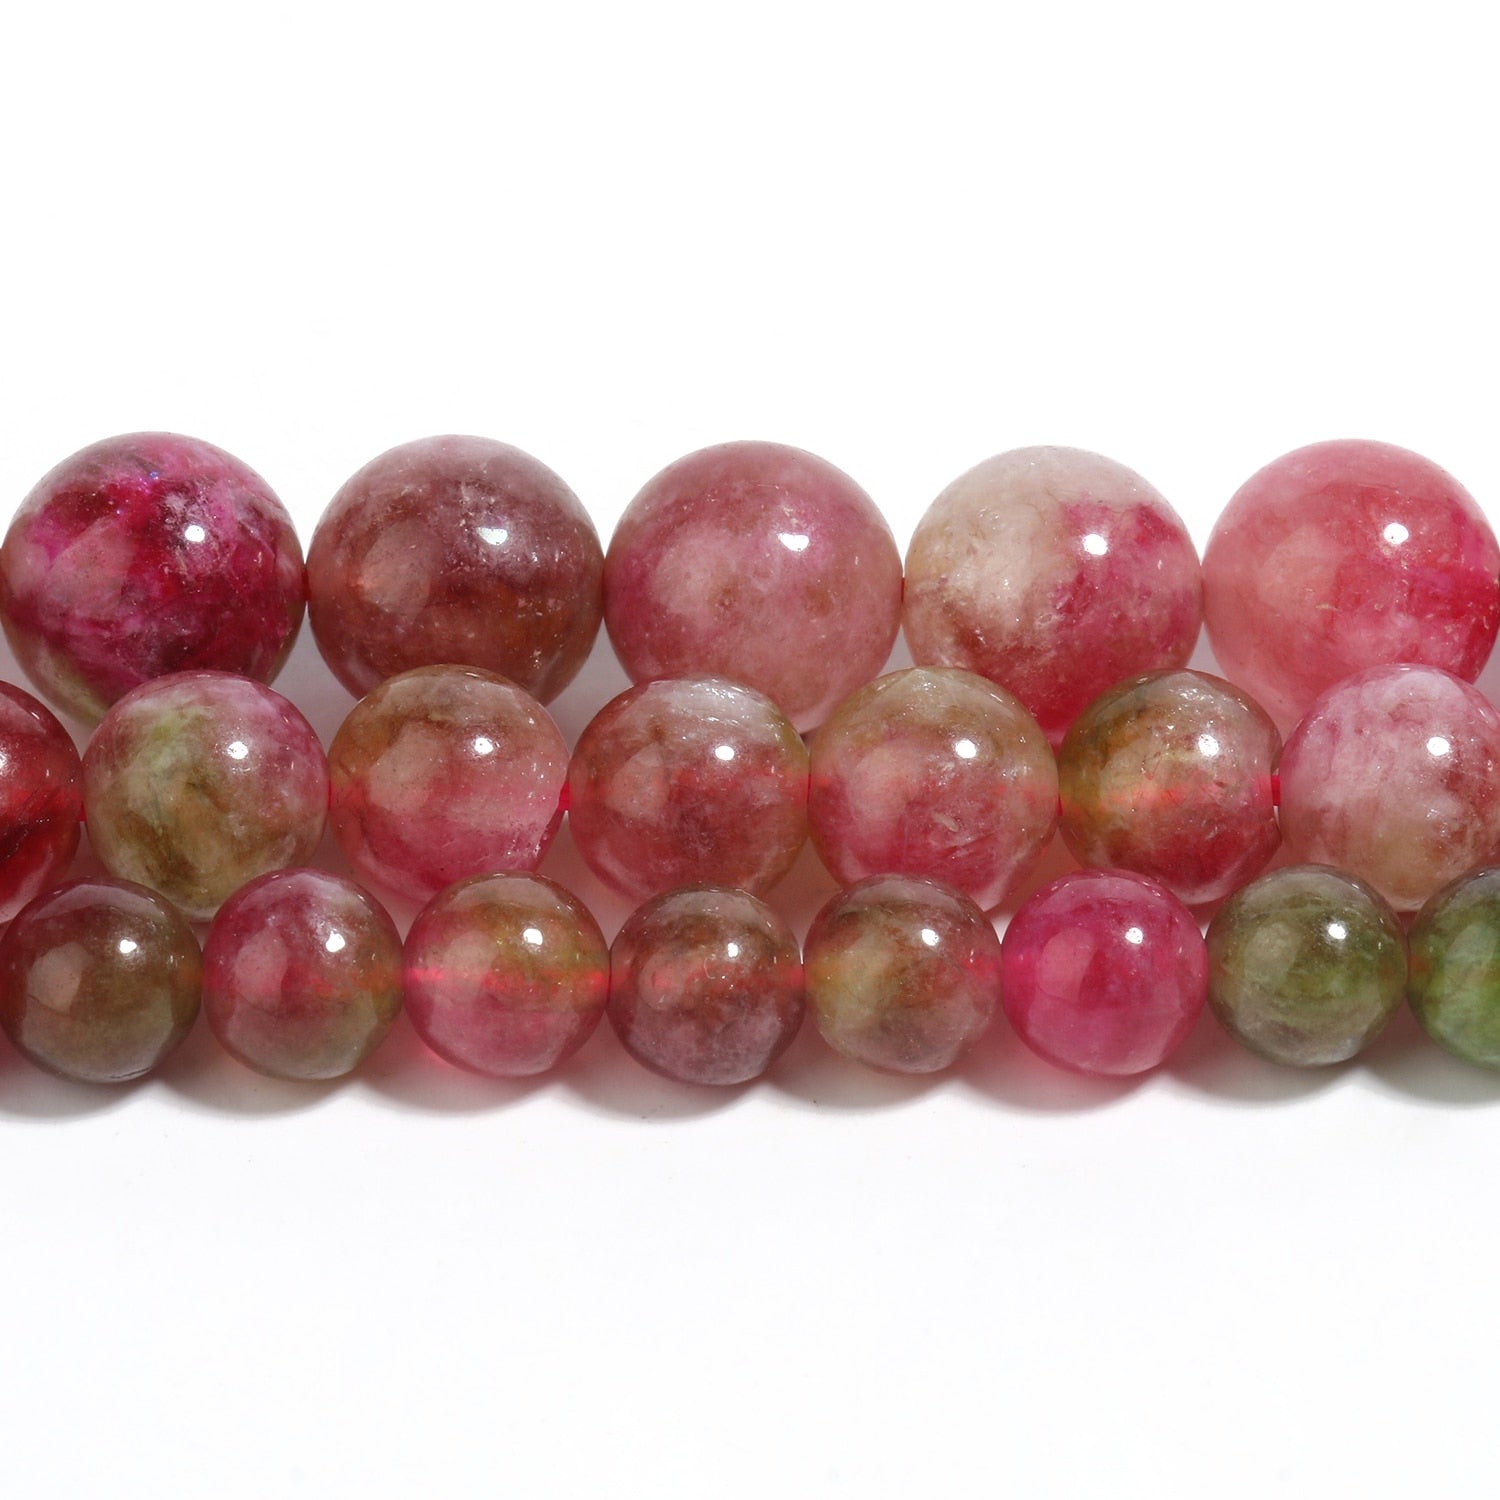 6 8 10mm Colorful Tourmaline Natural Stone Beads Loose Round Beads for Jewelry Making Diy Charms Bracelet Necklace Accessories